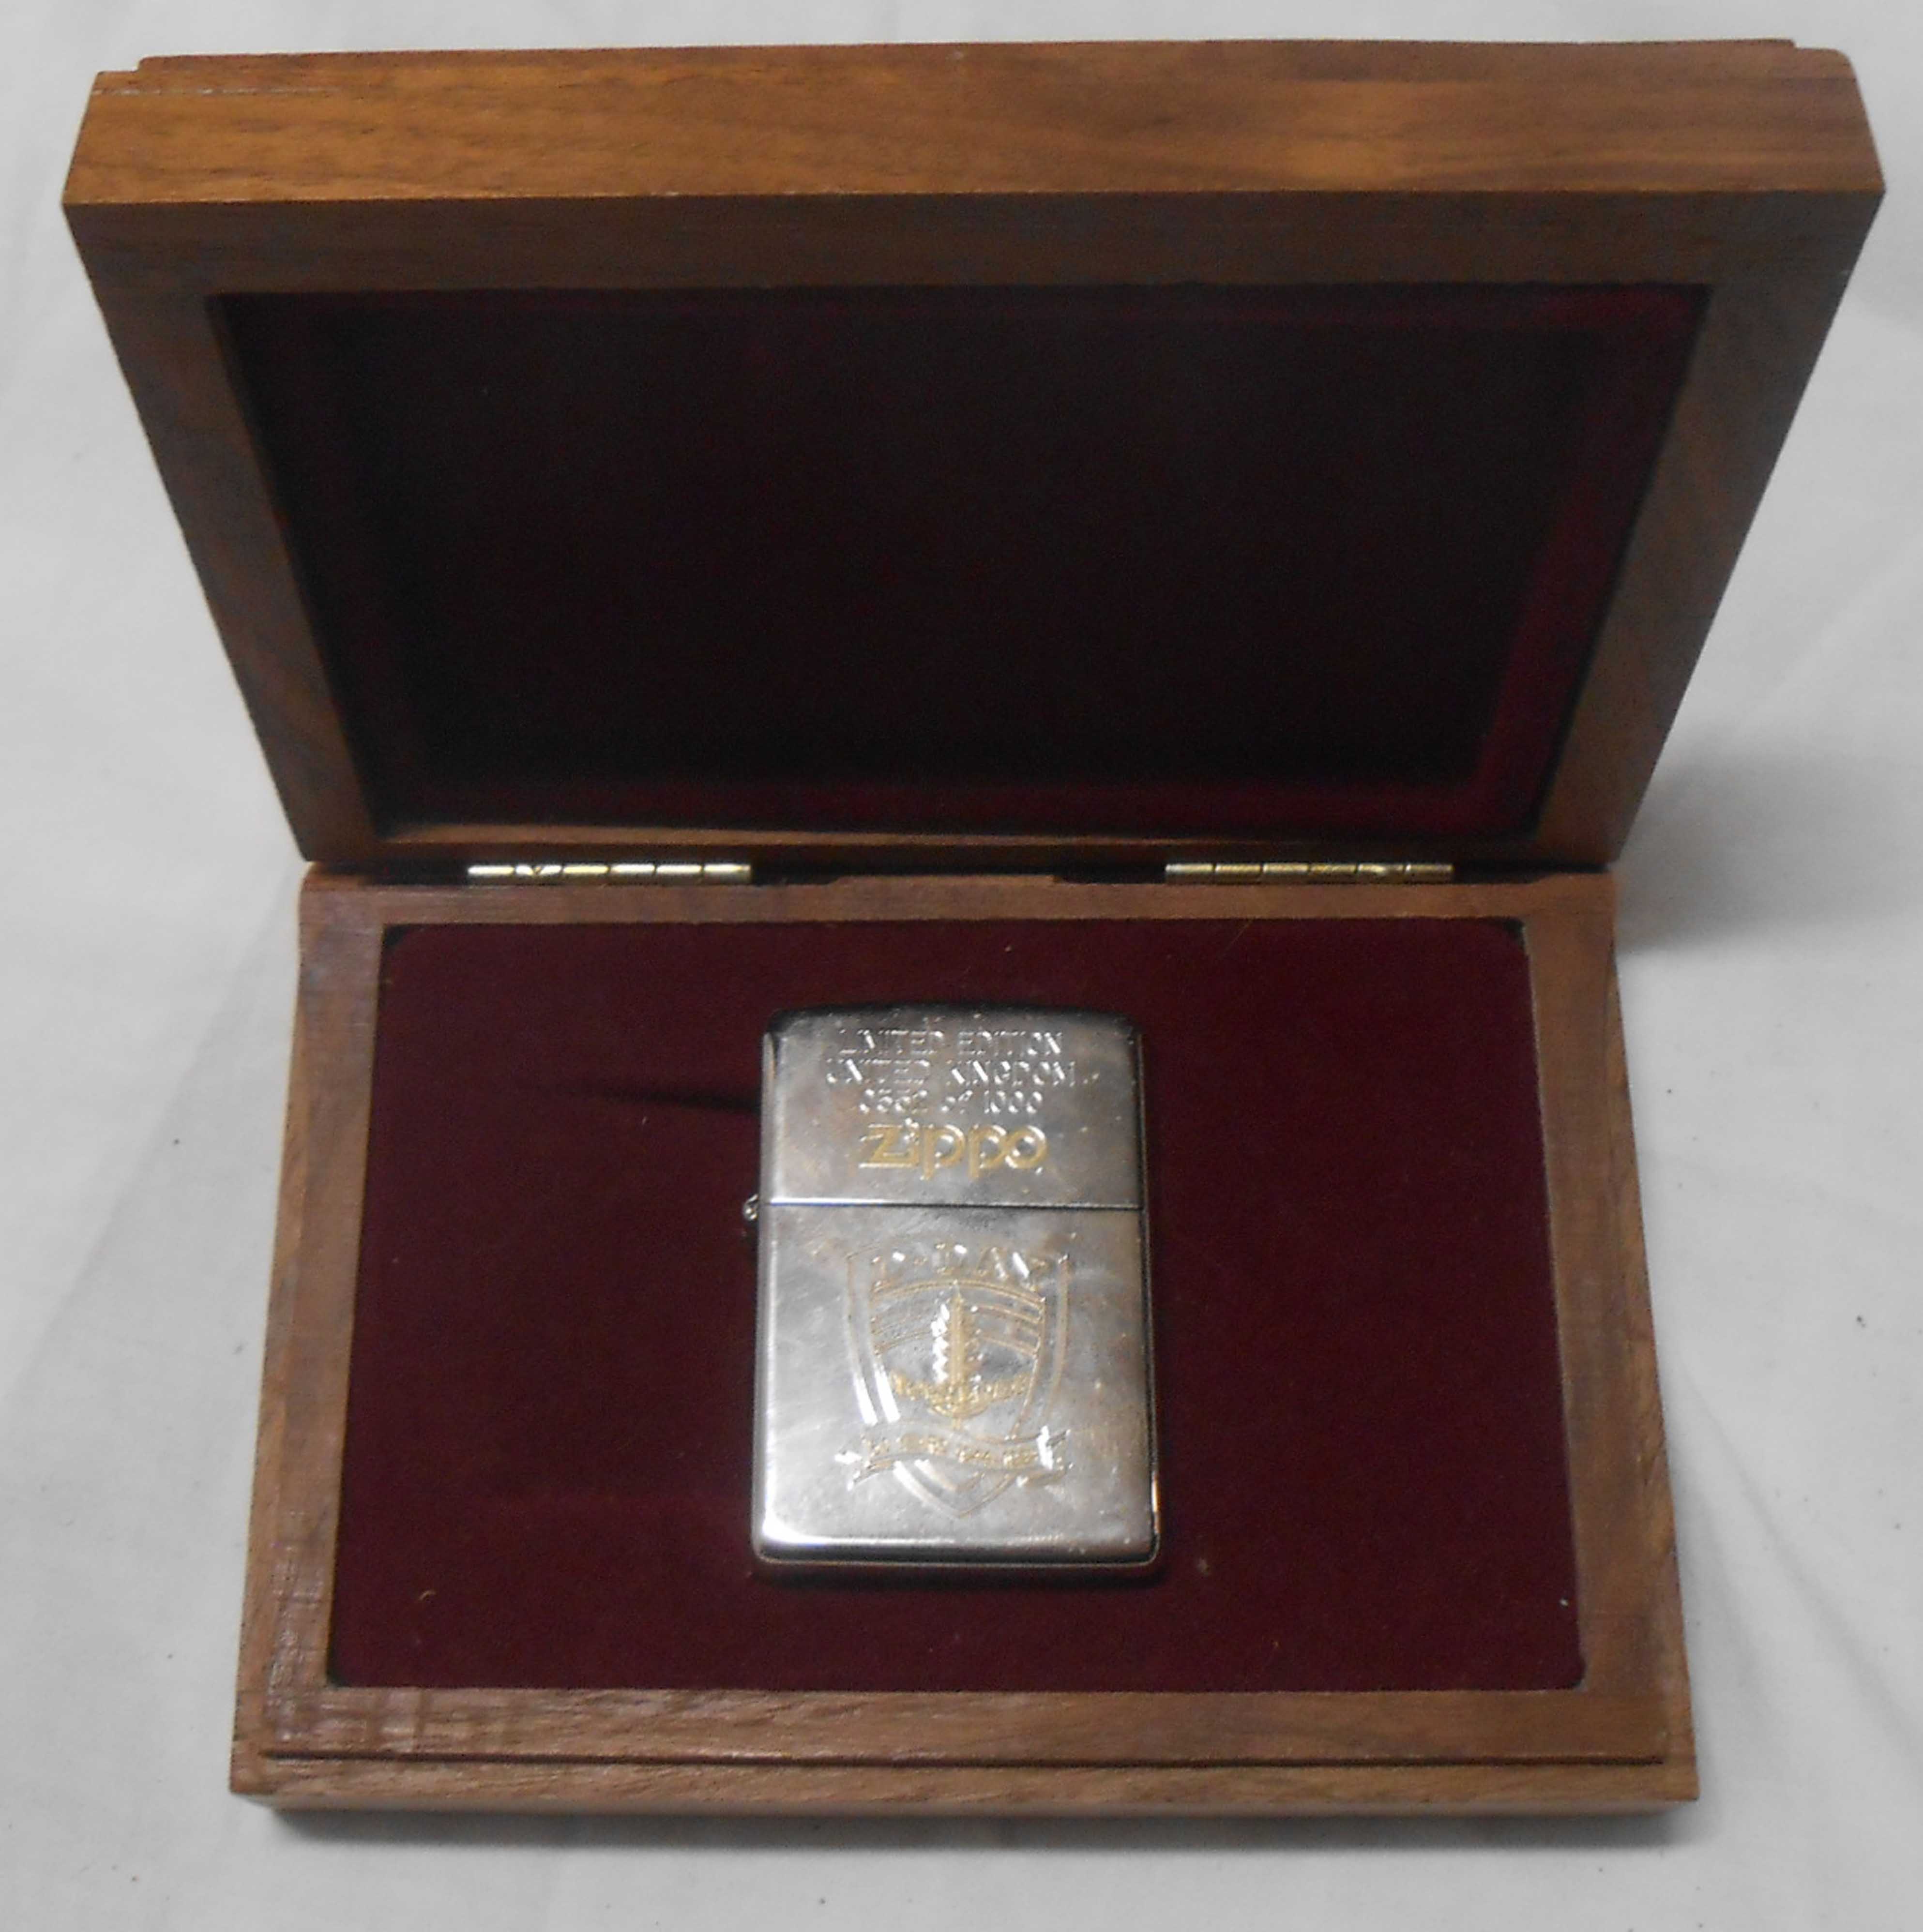 A limited edition Zippo lighter No. 352 in a limited edition of 1000 to commemorate the 50th